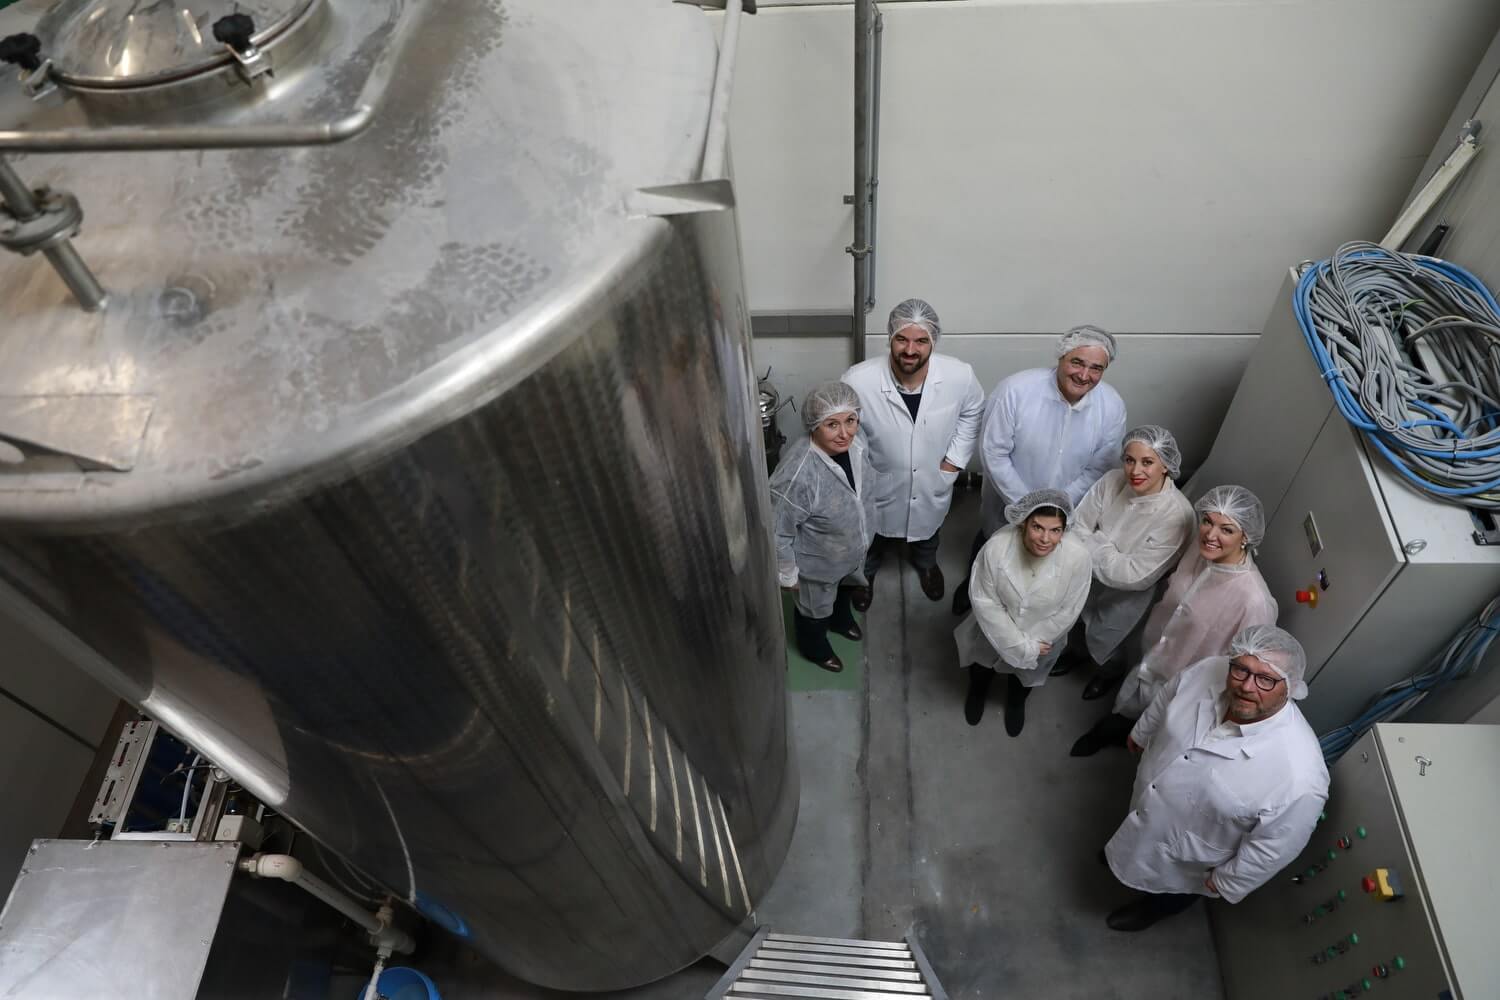 A group of Elixseri founders and scientists standing around their silver water distillation column which makes Swiss Alpine Light Water for the Elixseri serums.